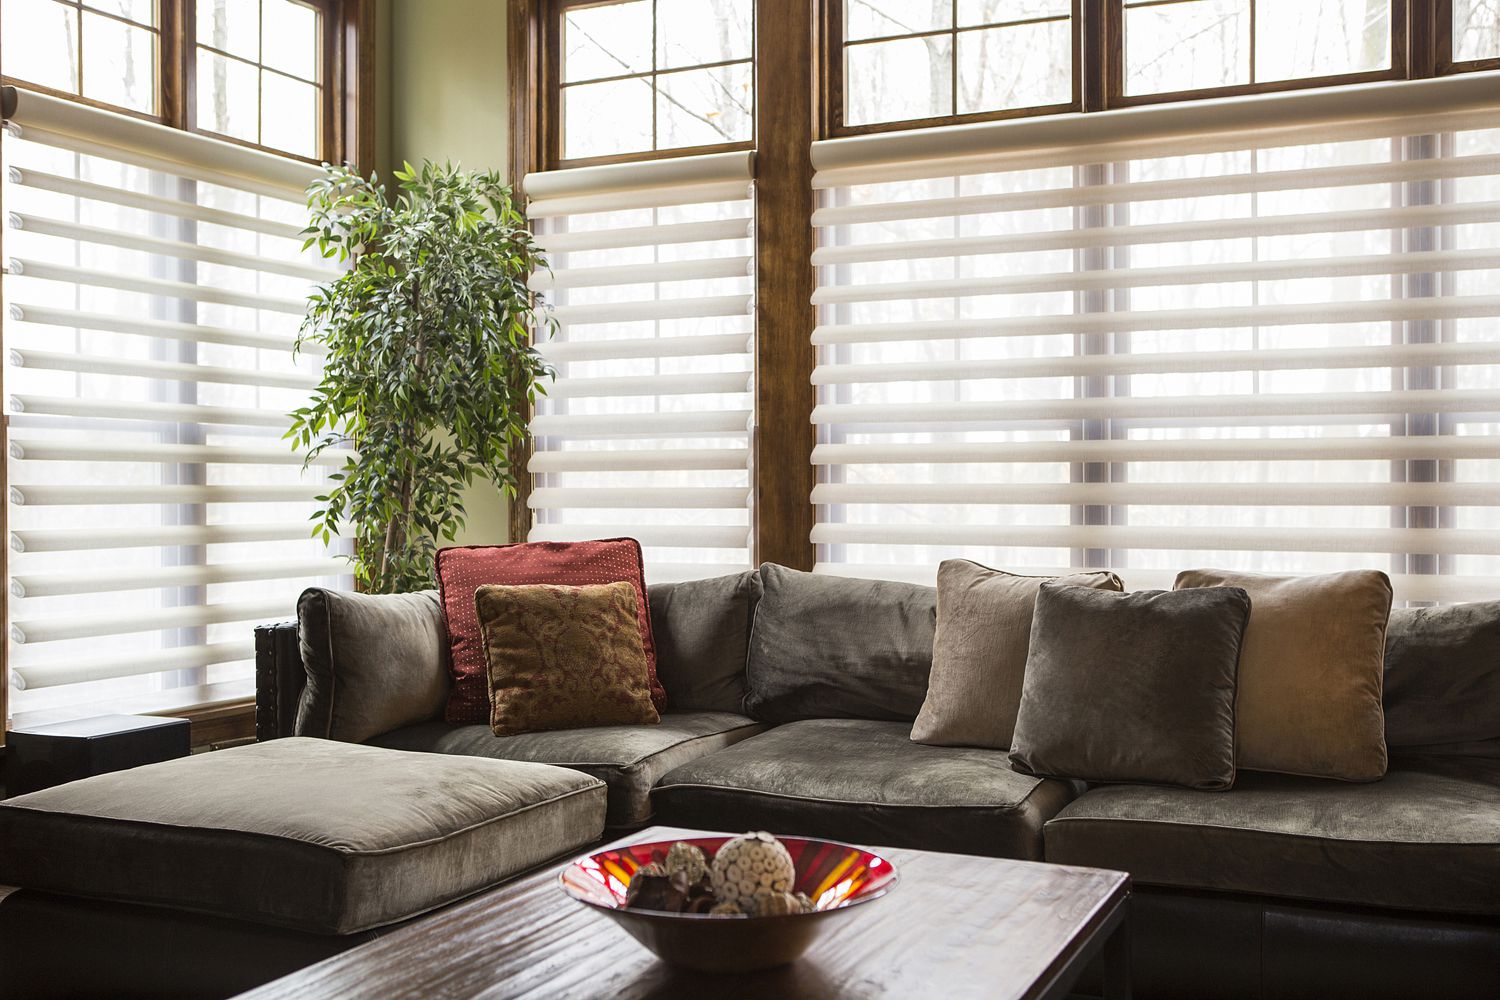 How to Clean Window Blinds Cheaply